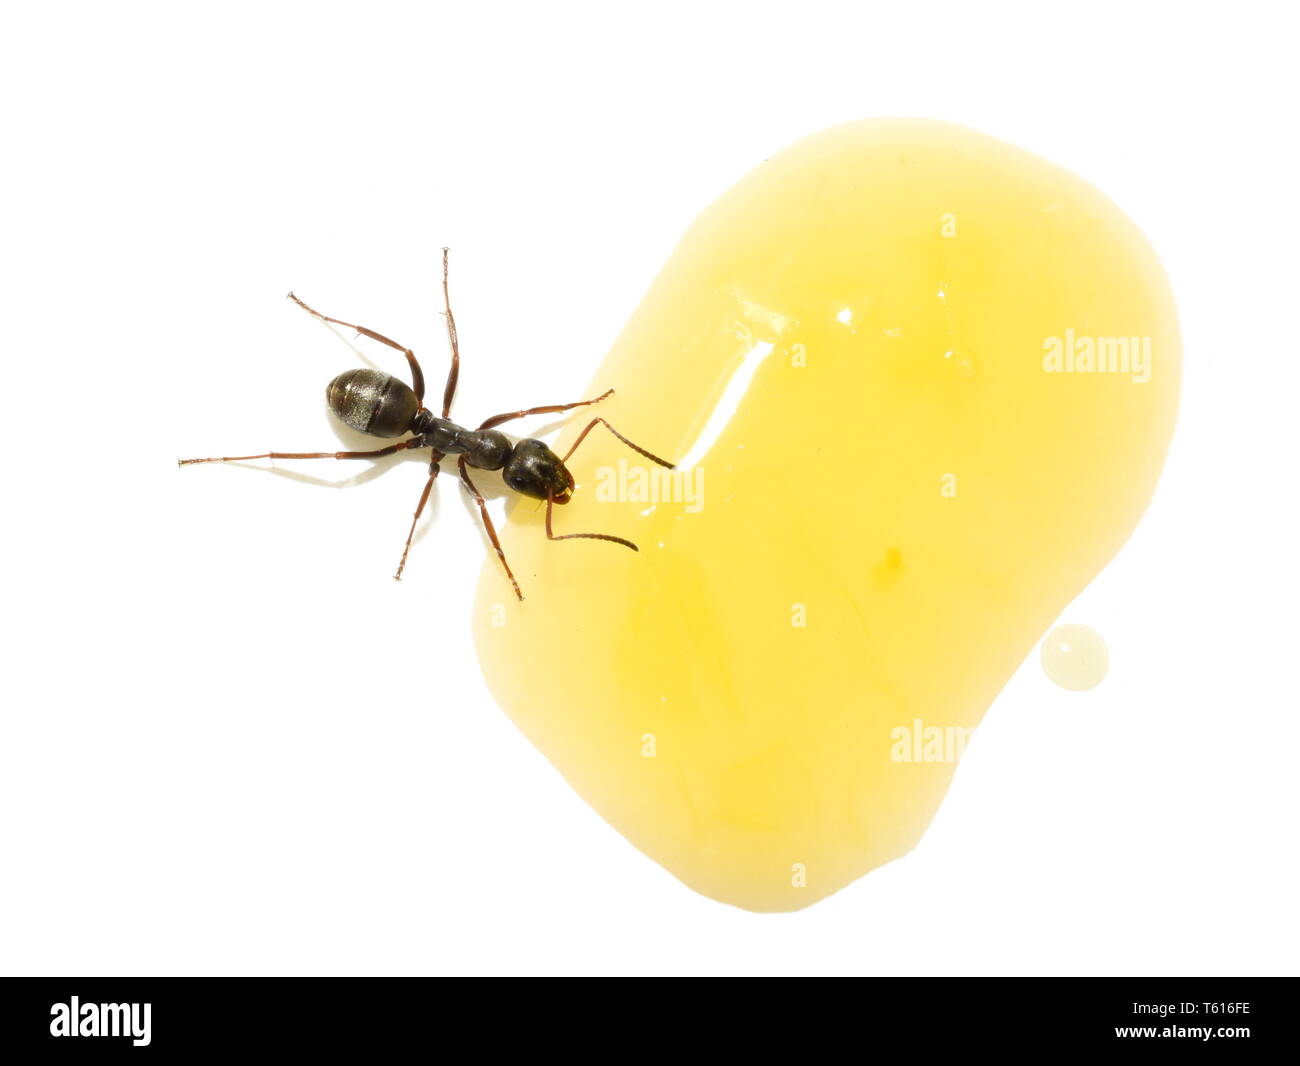 The black garden ant Lasius niger drinking from a droplet of orange juice Stock Photo